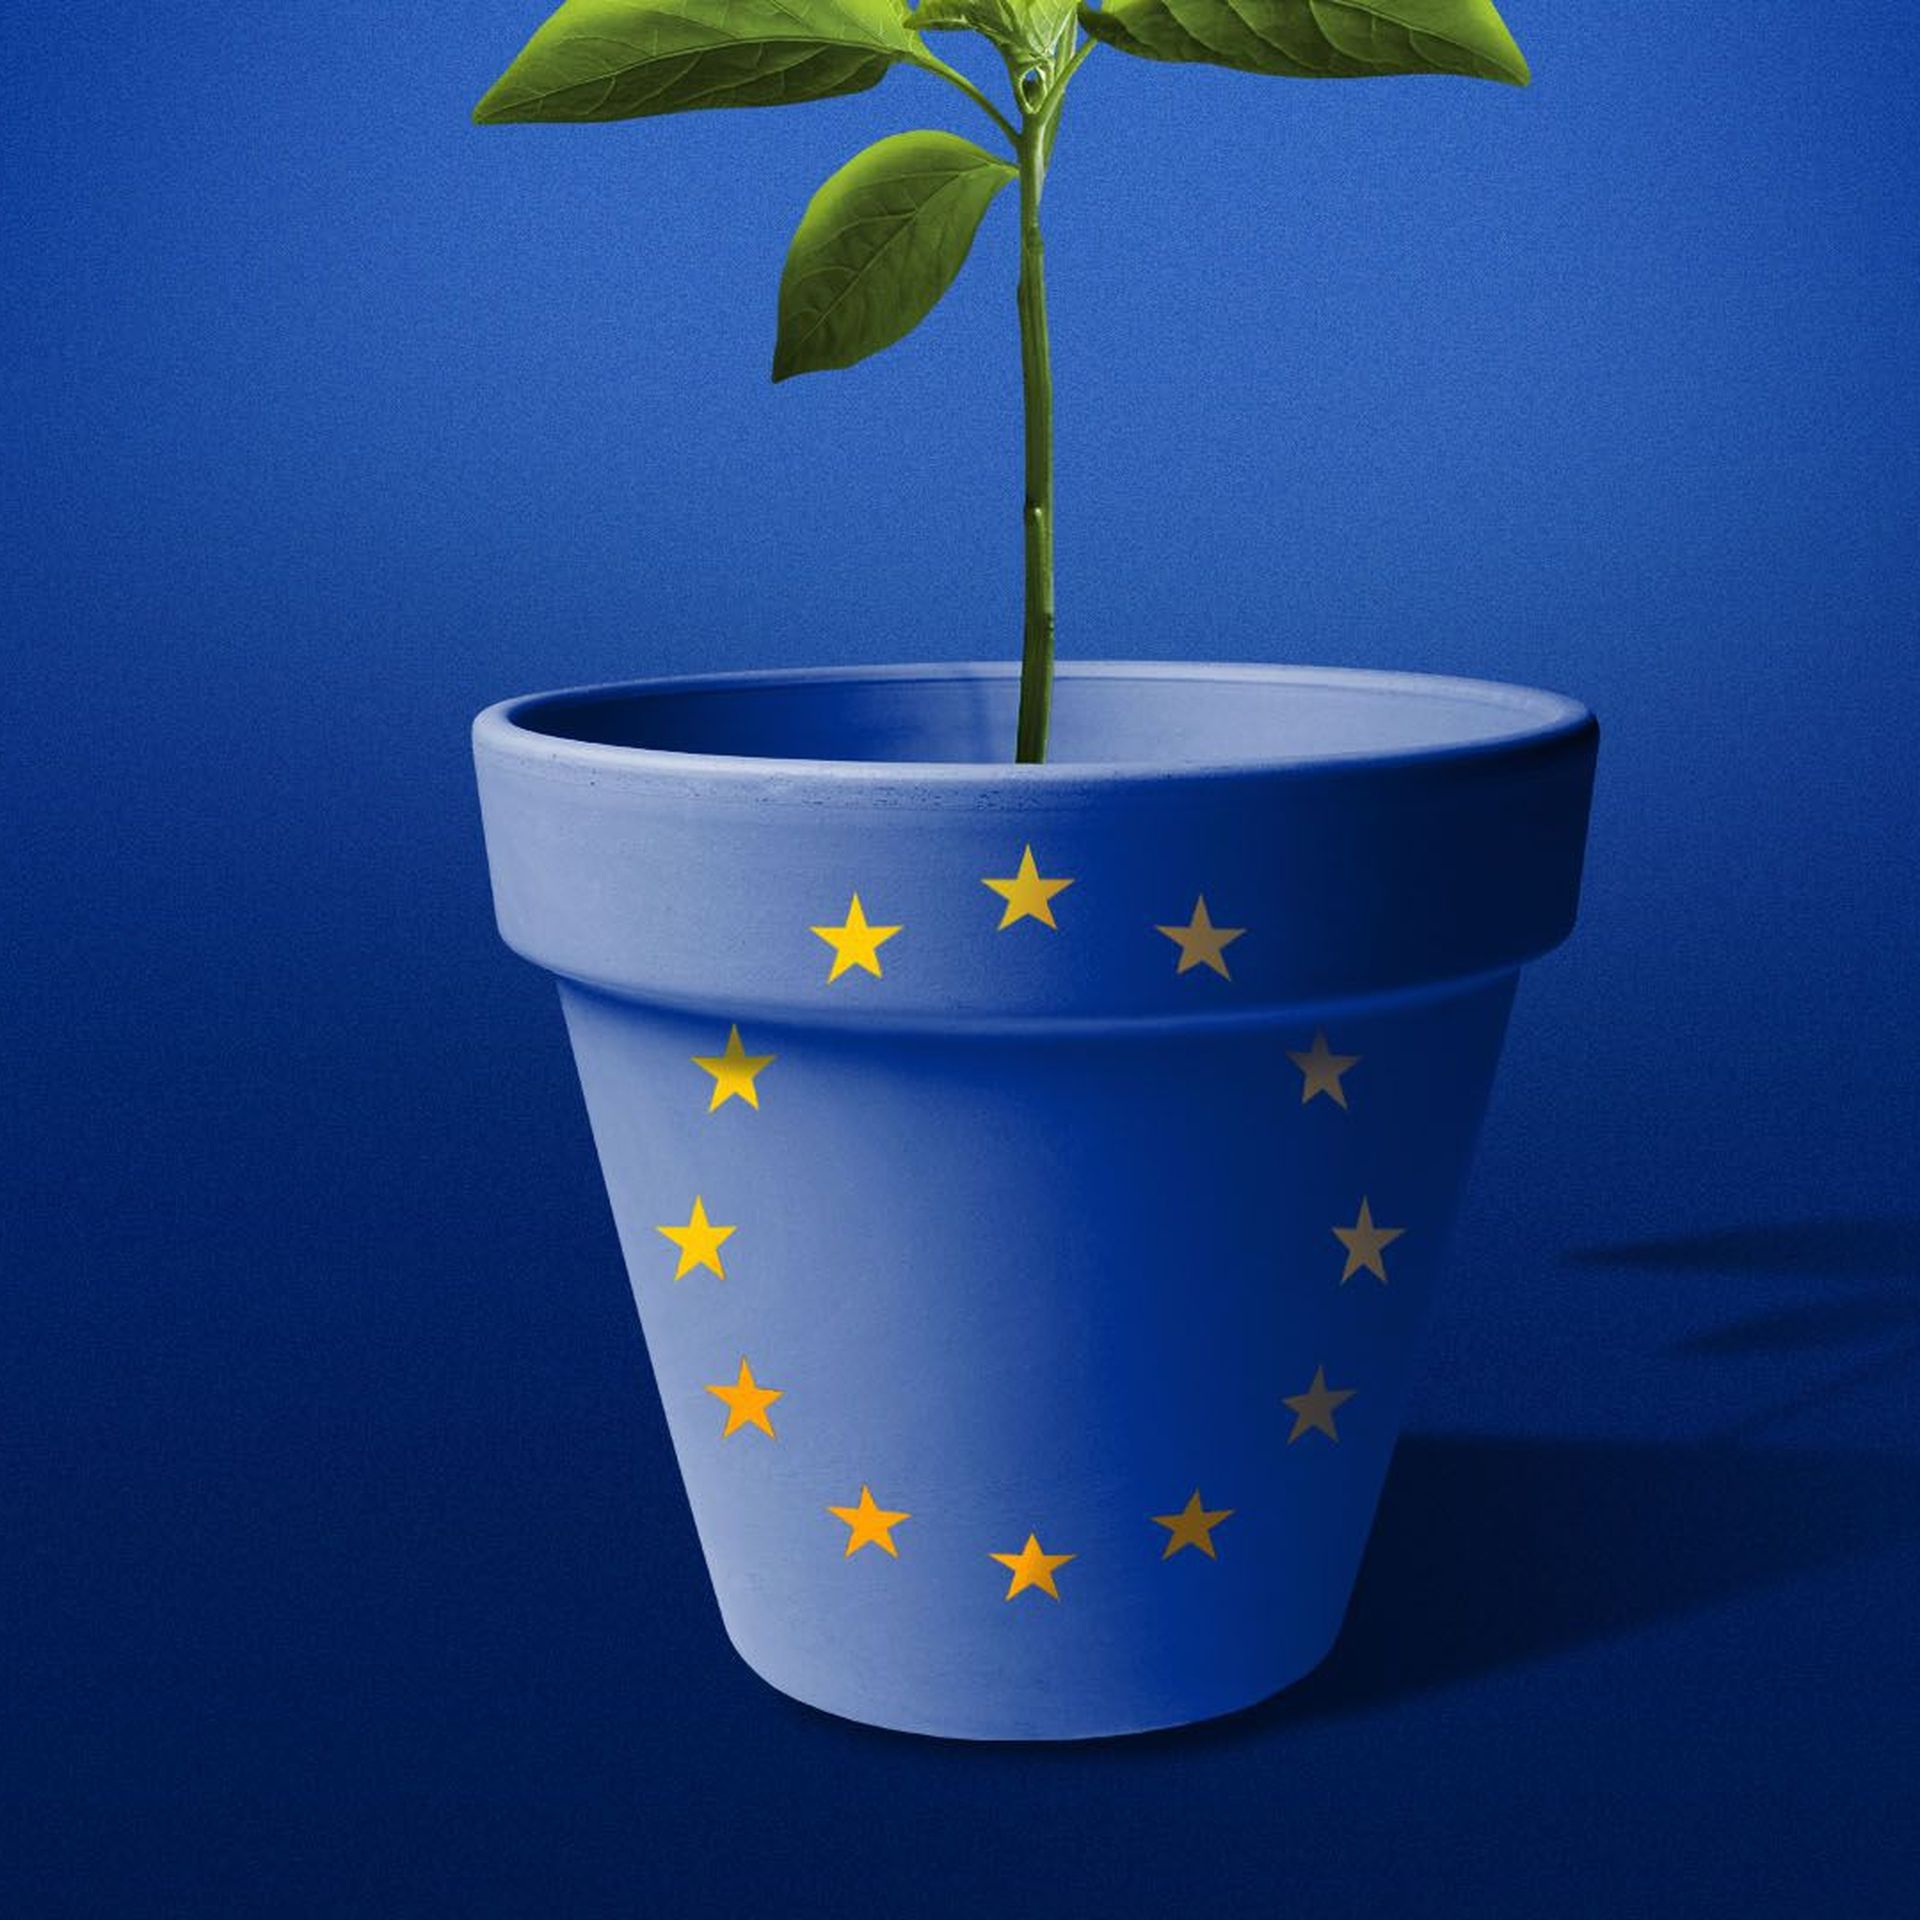 Potted plant on in colors of EU flag